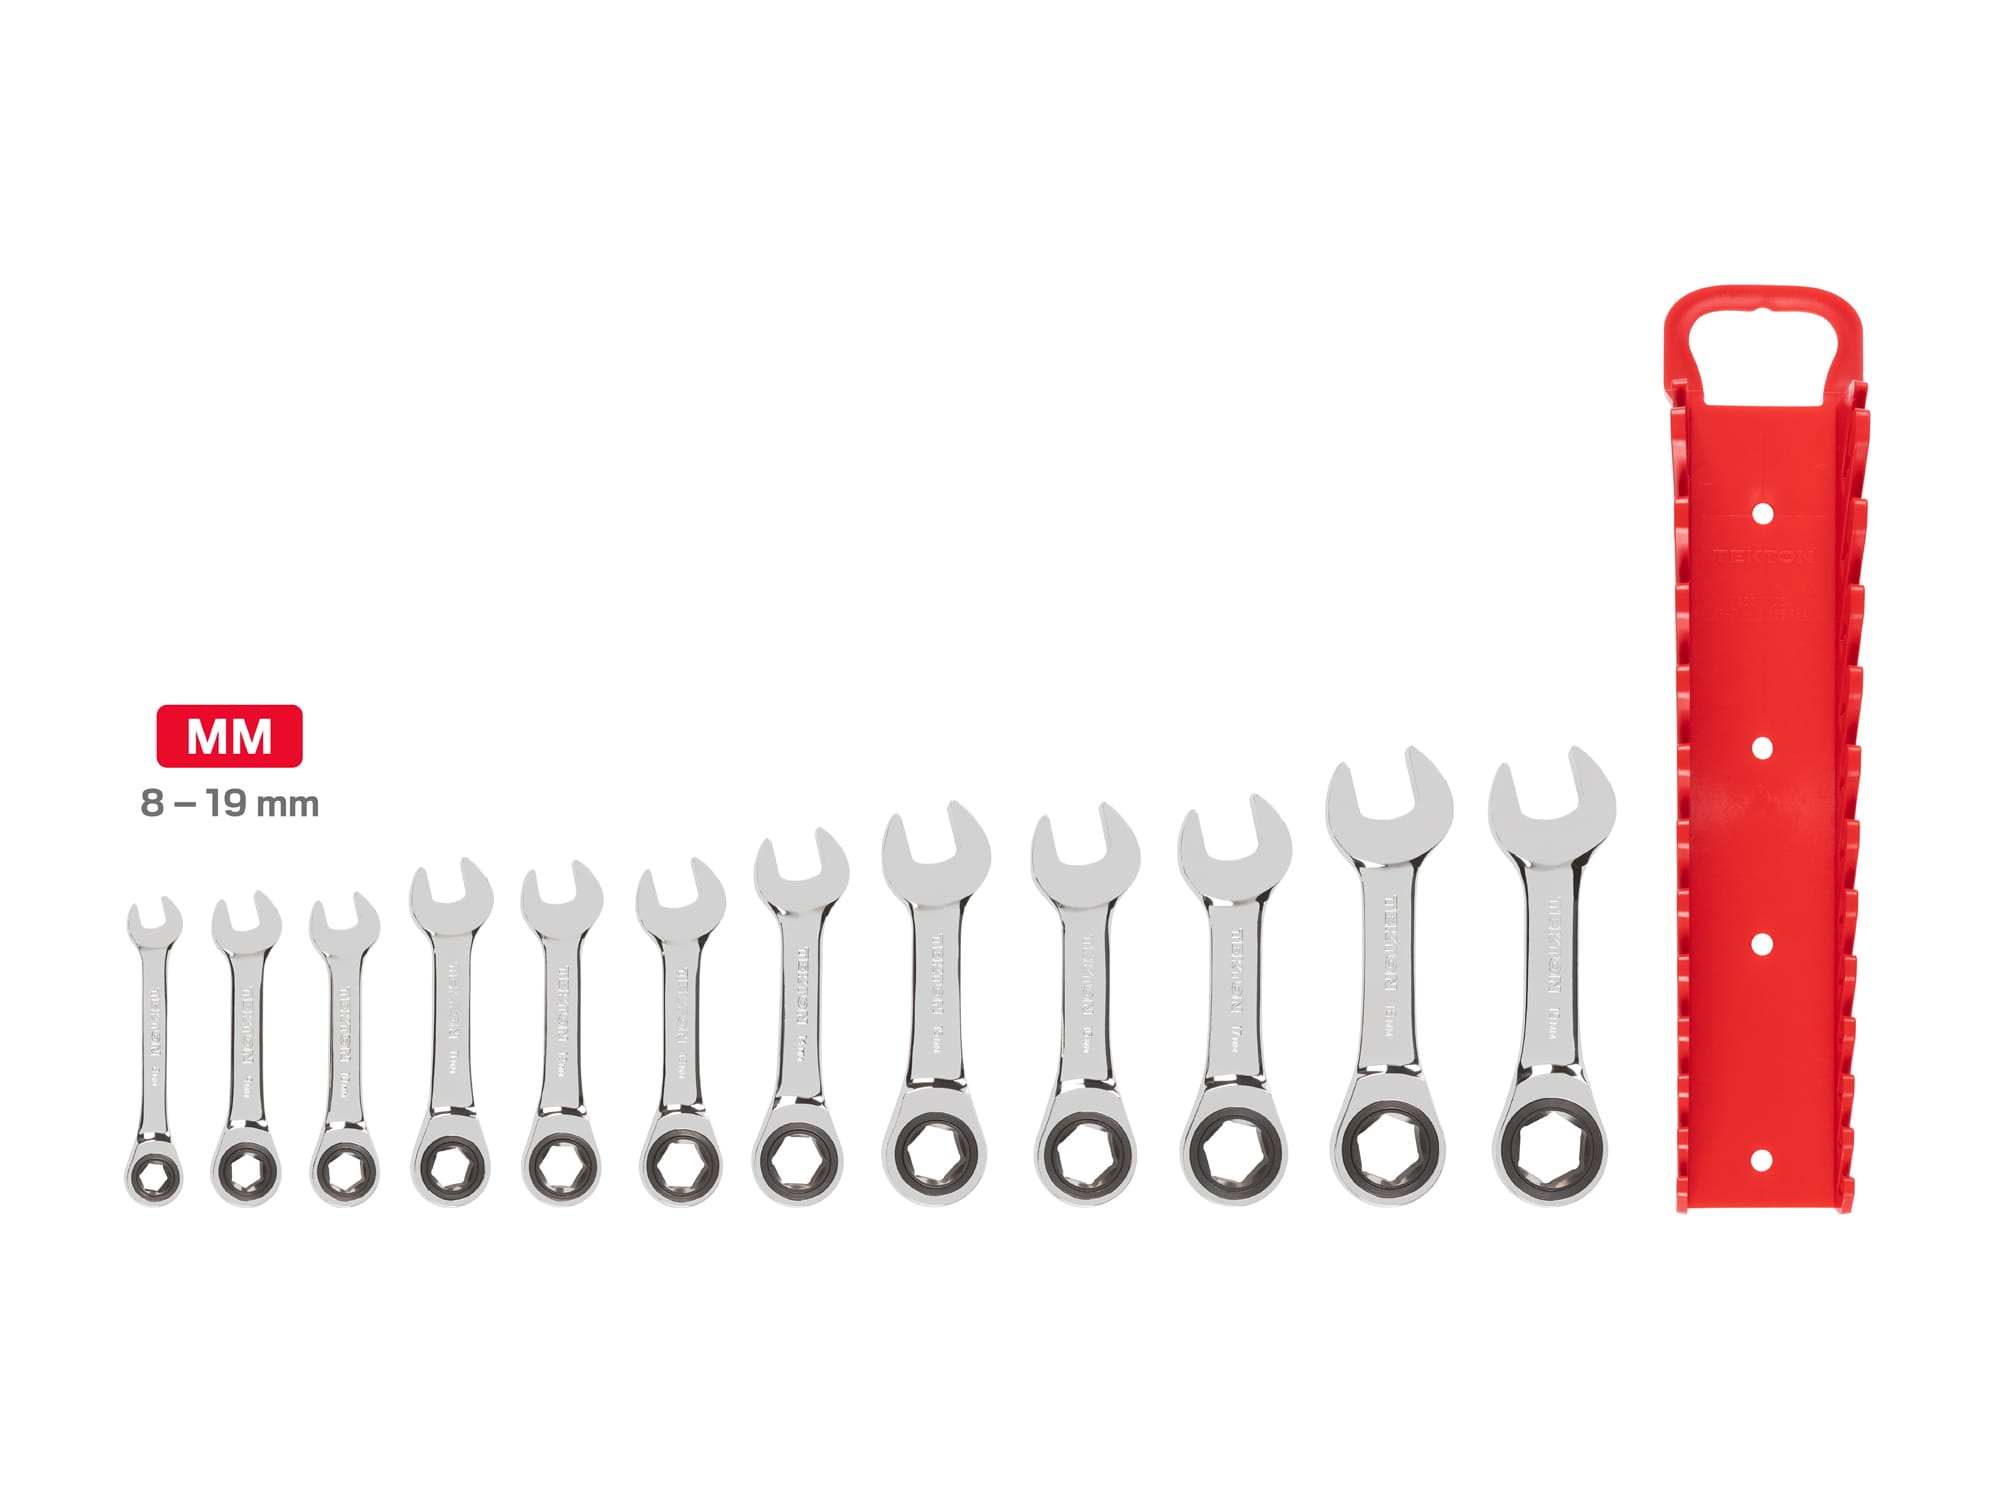 Stubby Ratcheting Combination Wrench Set, 12-Piece (8-19 mm) - Holder